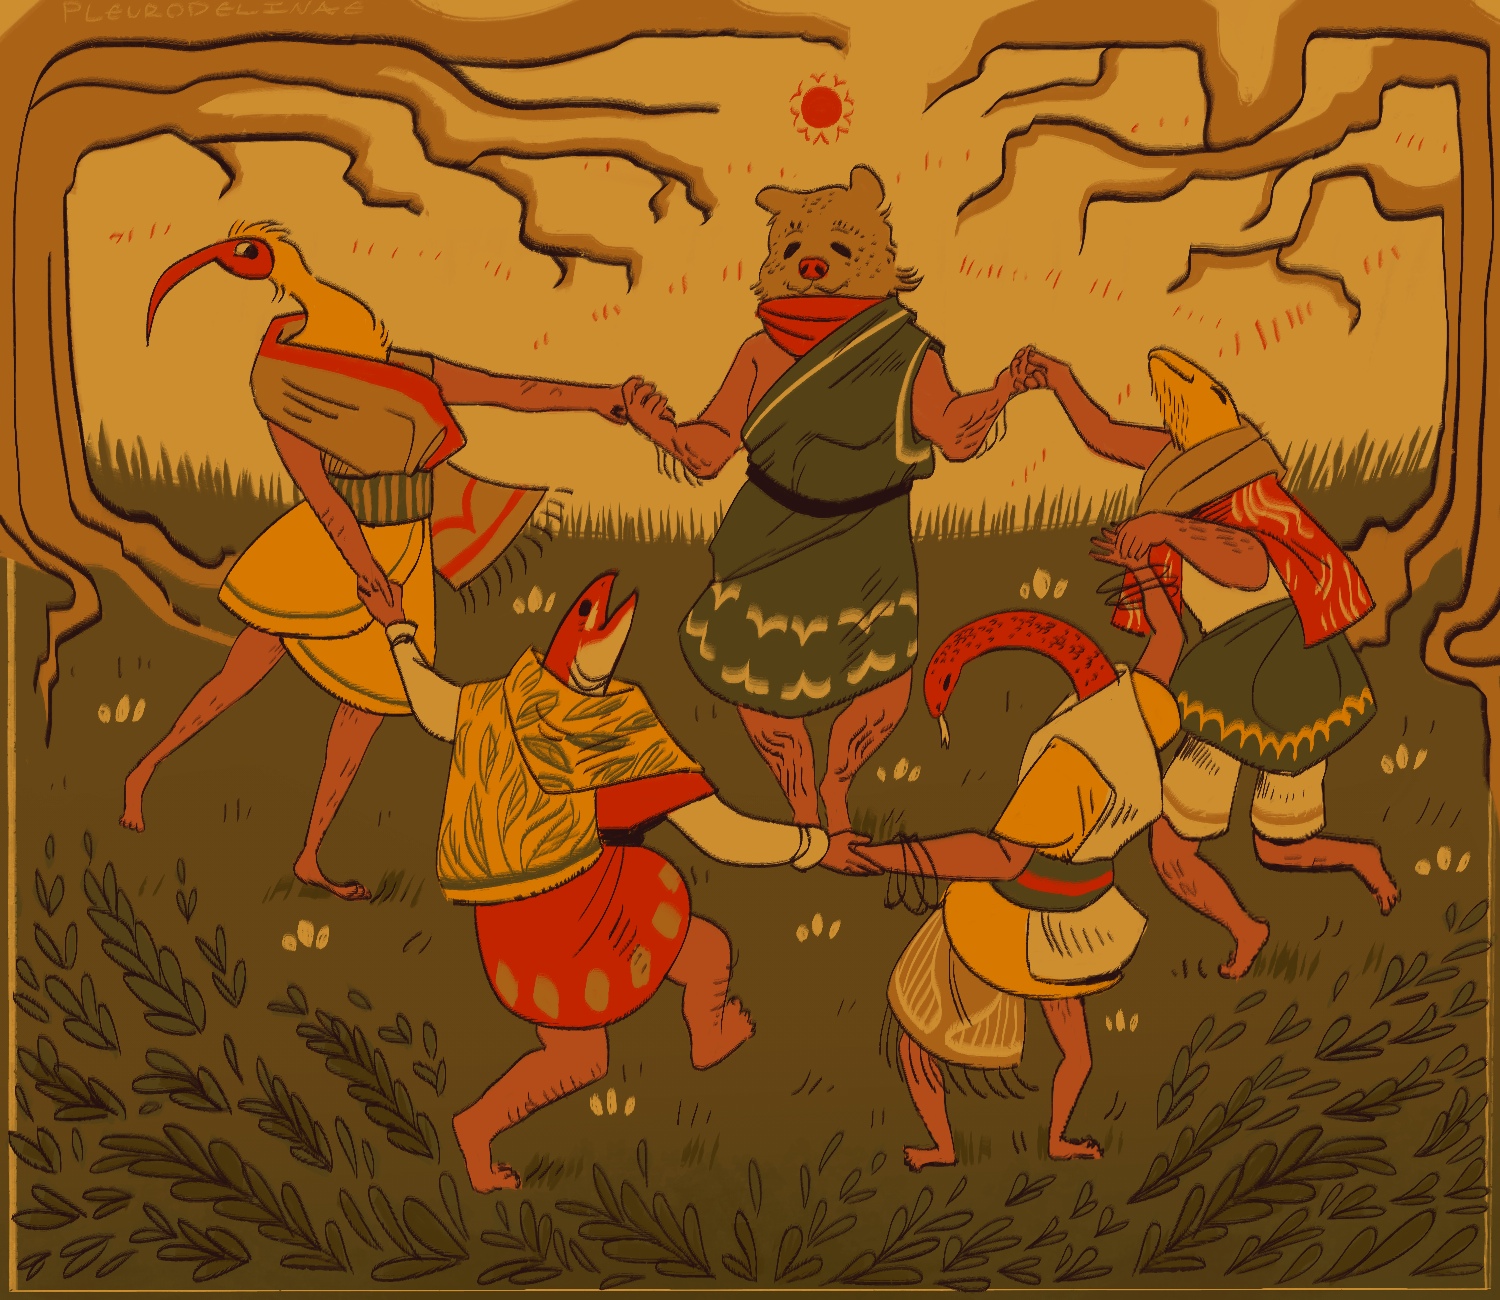 In the style of an old carving (of some sort), a group of anthropomorphic animals (including a snake, fish, flamingo, and what i think is a hamster?) dance in a circle wearing traditional European ceremonial dress as the sun sets behind their forest clearing.